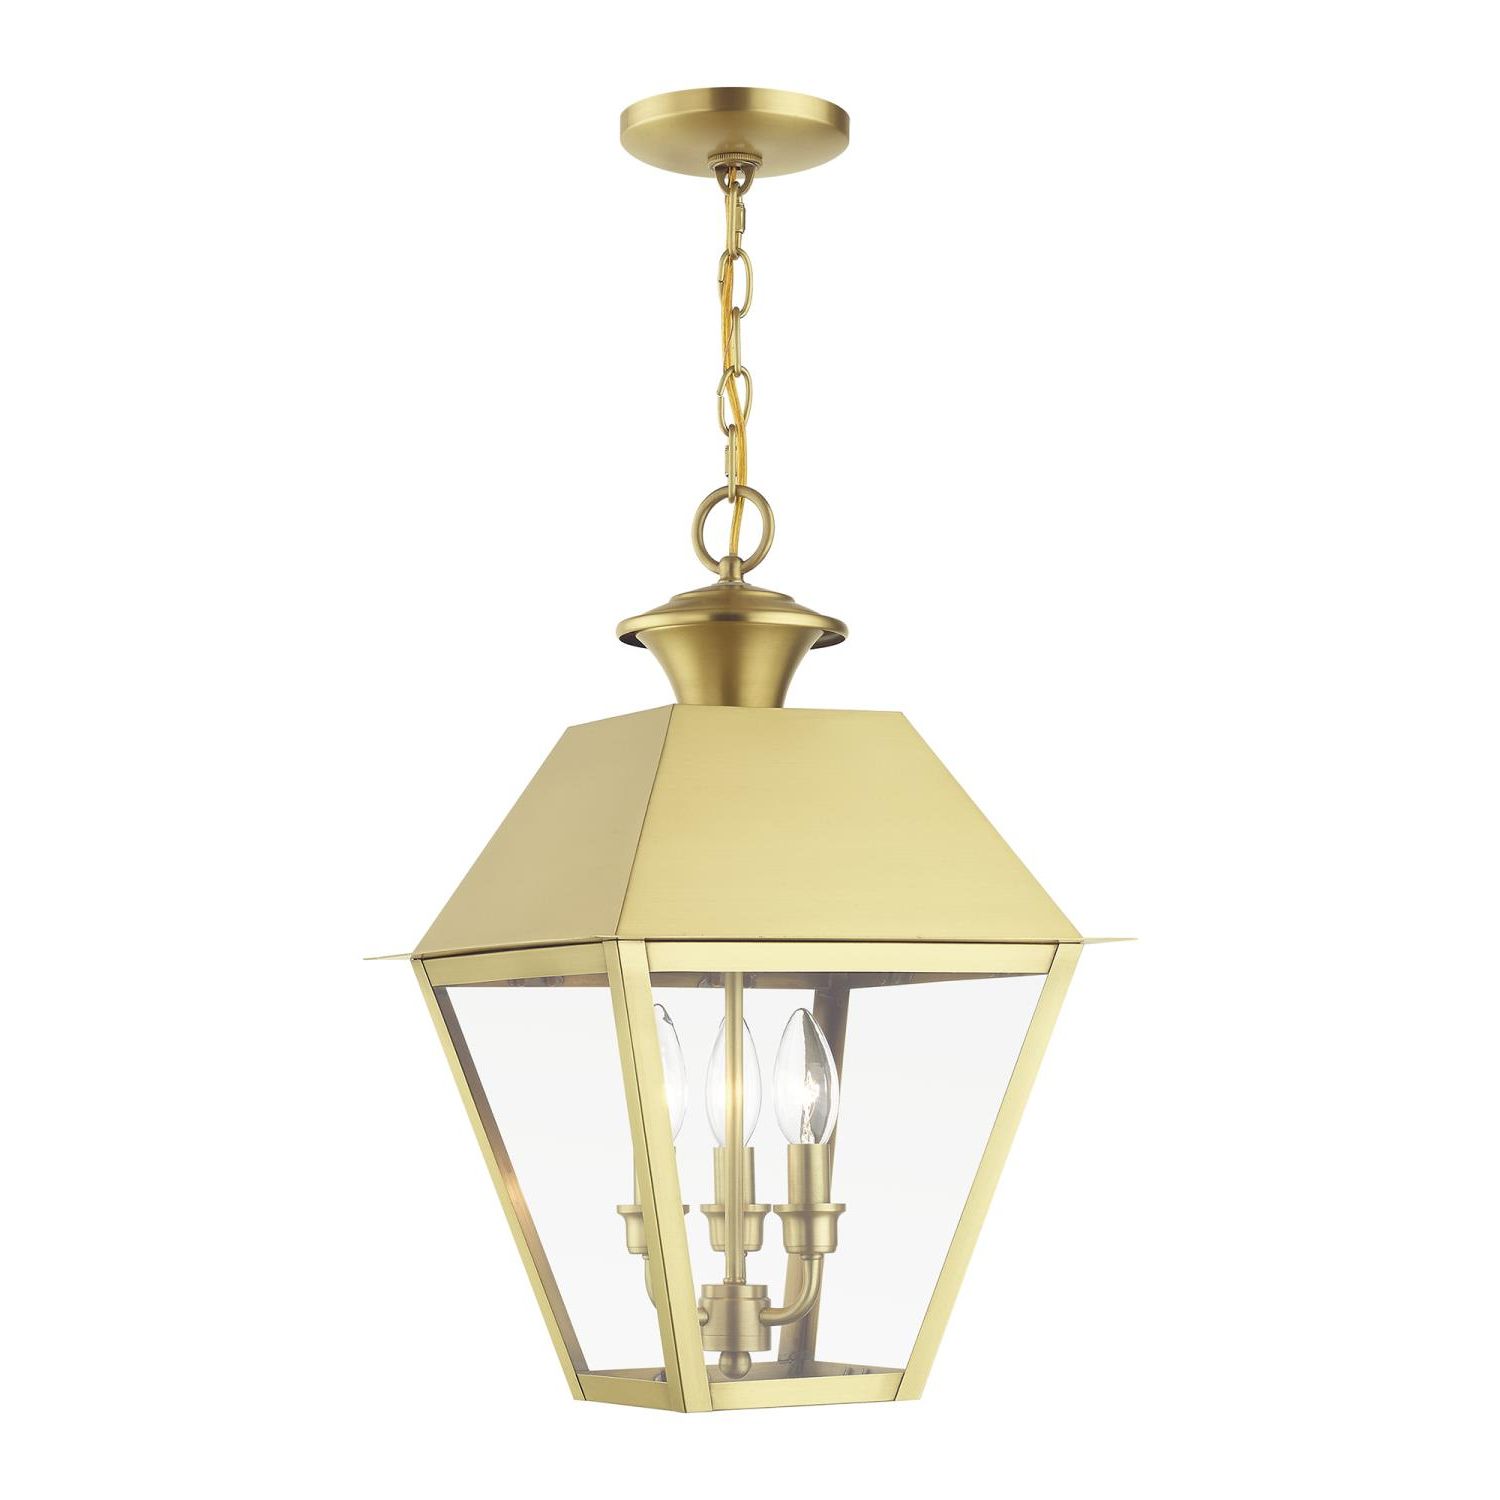 Most Recent Livex Lighting 3 Light Natural Brass Outdoor Large Pendant Lantern 27220 08  – Walmart With Regard To Natural Brass Lantern Chandeliers (View 12 of 15)